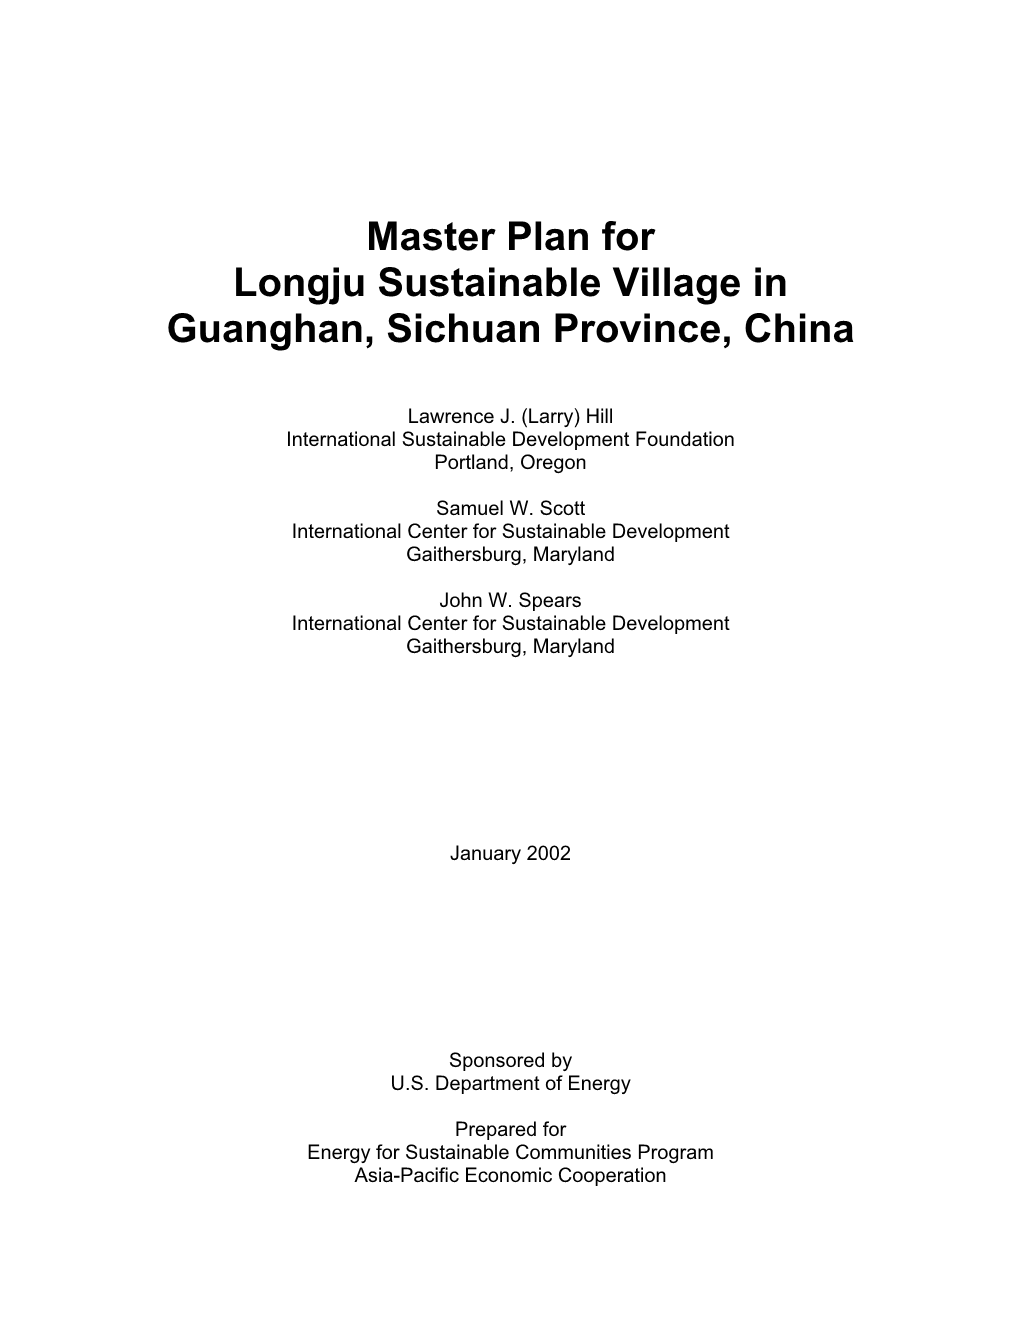 Master Plan for Longju Sustainable Village in Guanghan, Sichuan Province, China